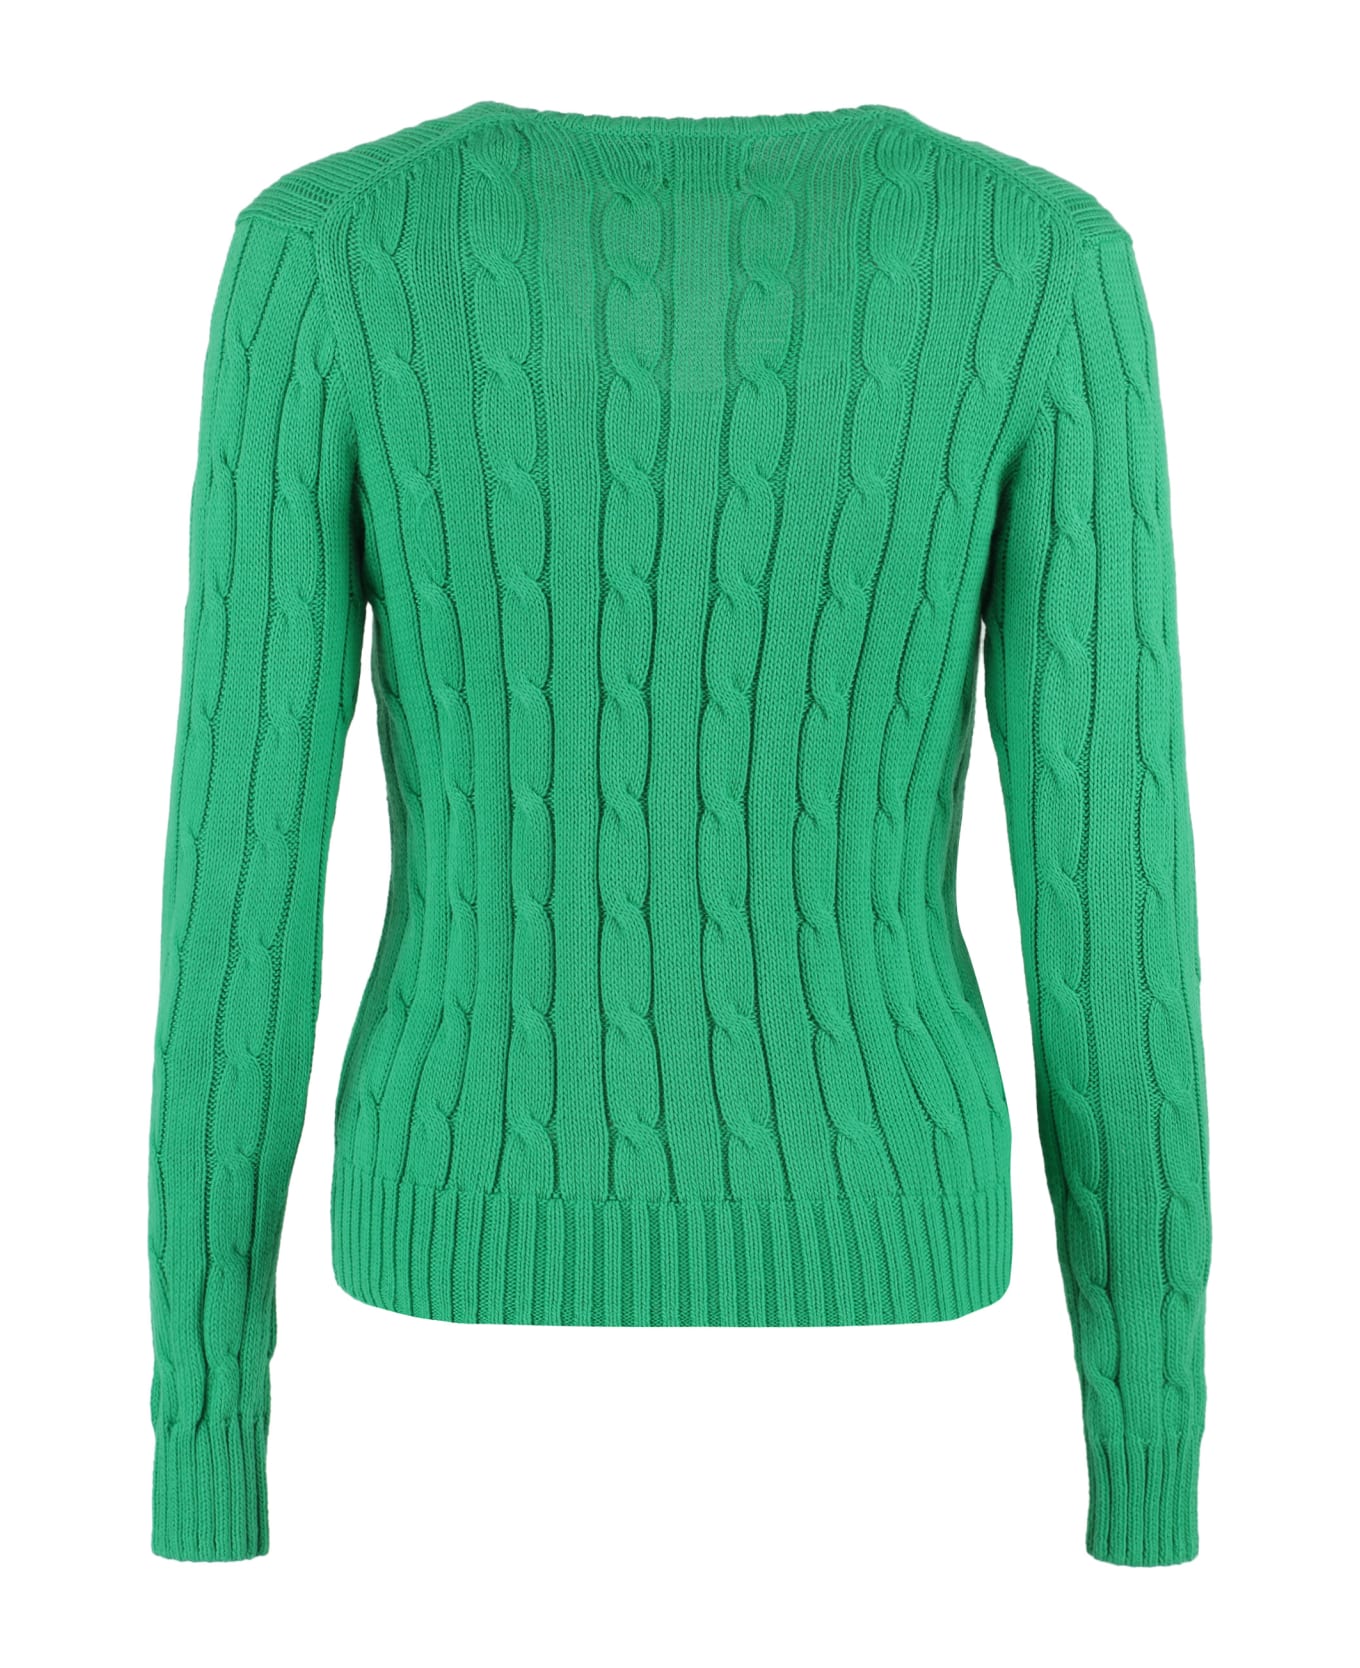 Polo Ralph Lauren Cable Knit Sweater - green ニットウェア